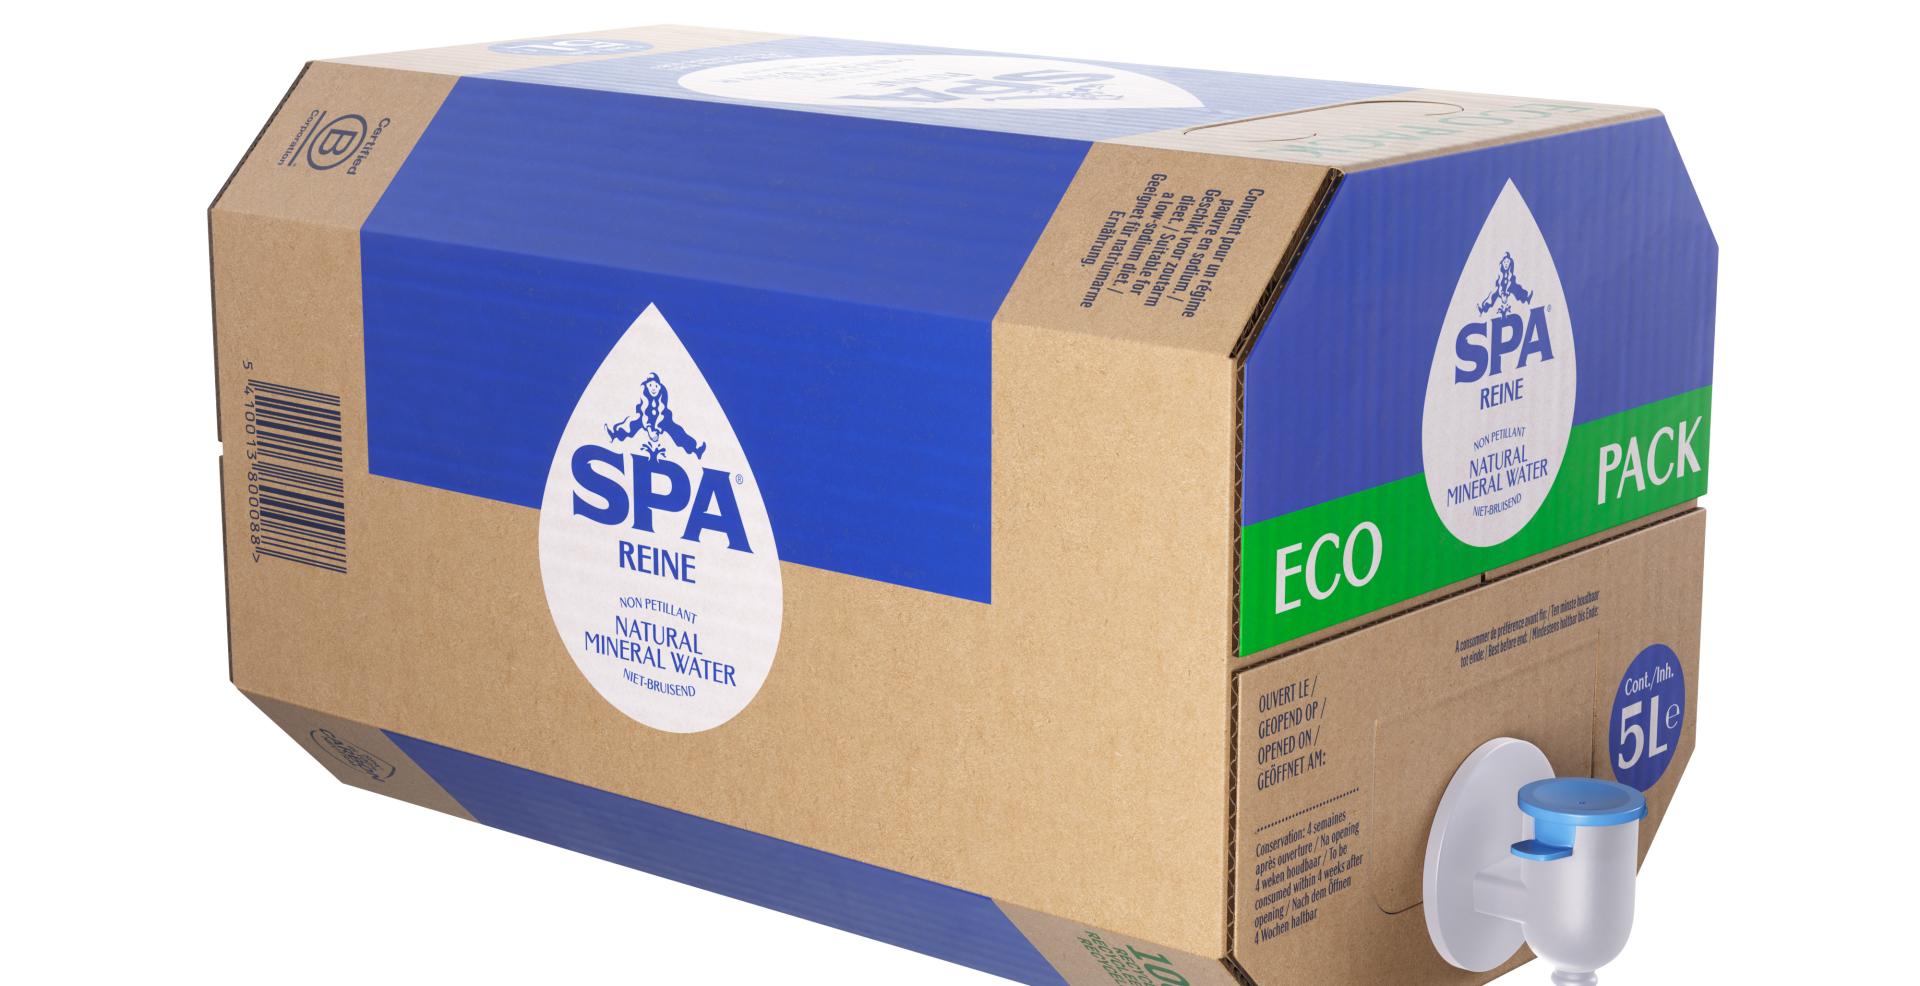 Spadel innovates with practical and eco-friendly packaging